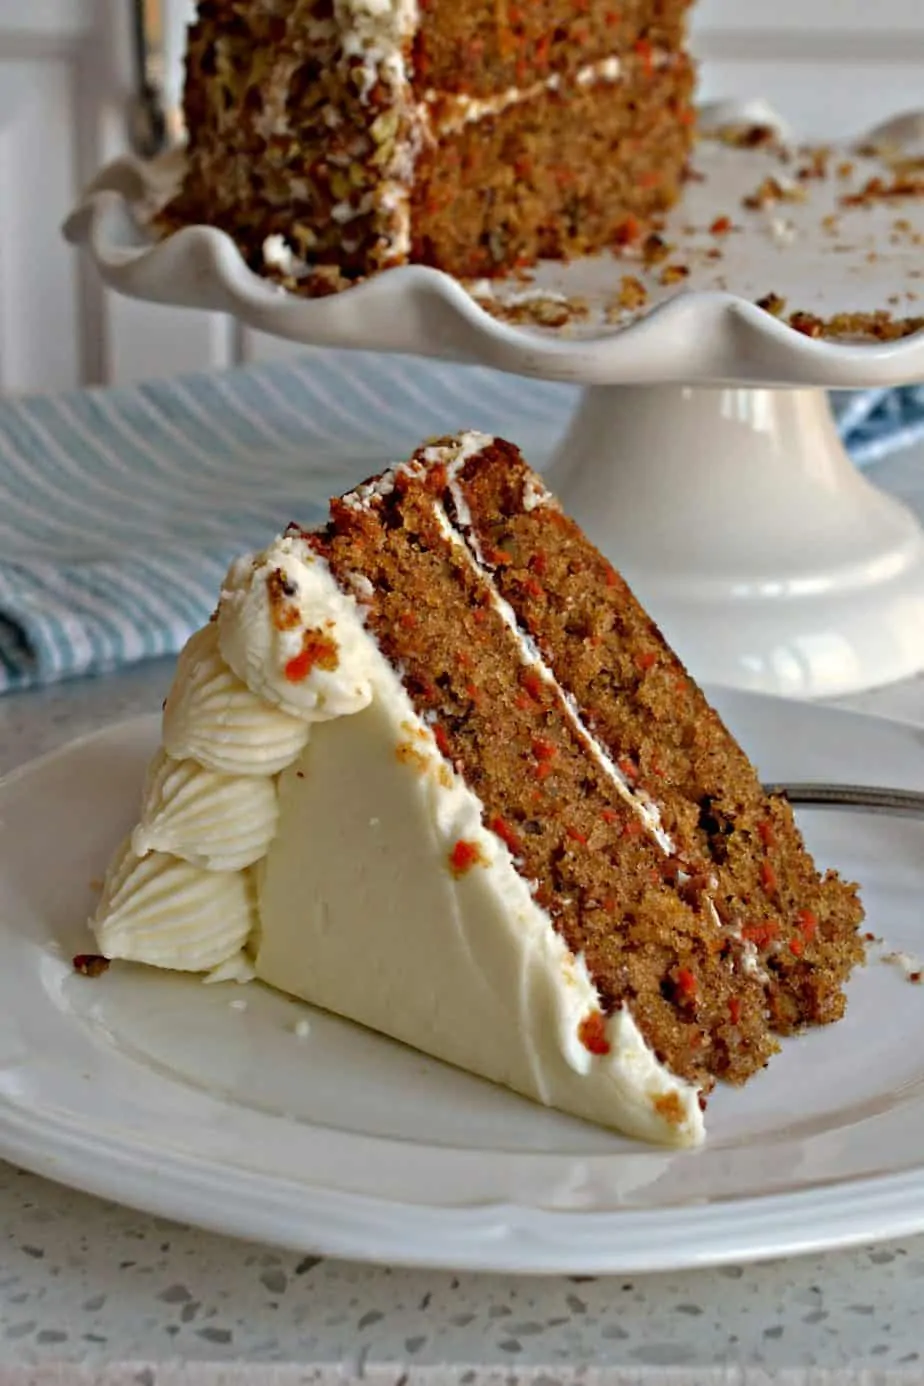 Carrot Cake History & Facts